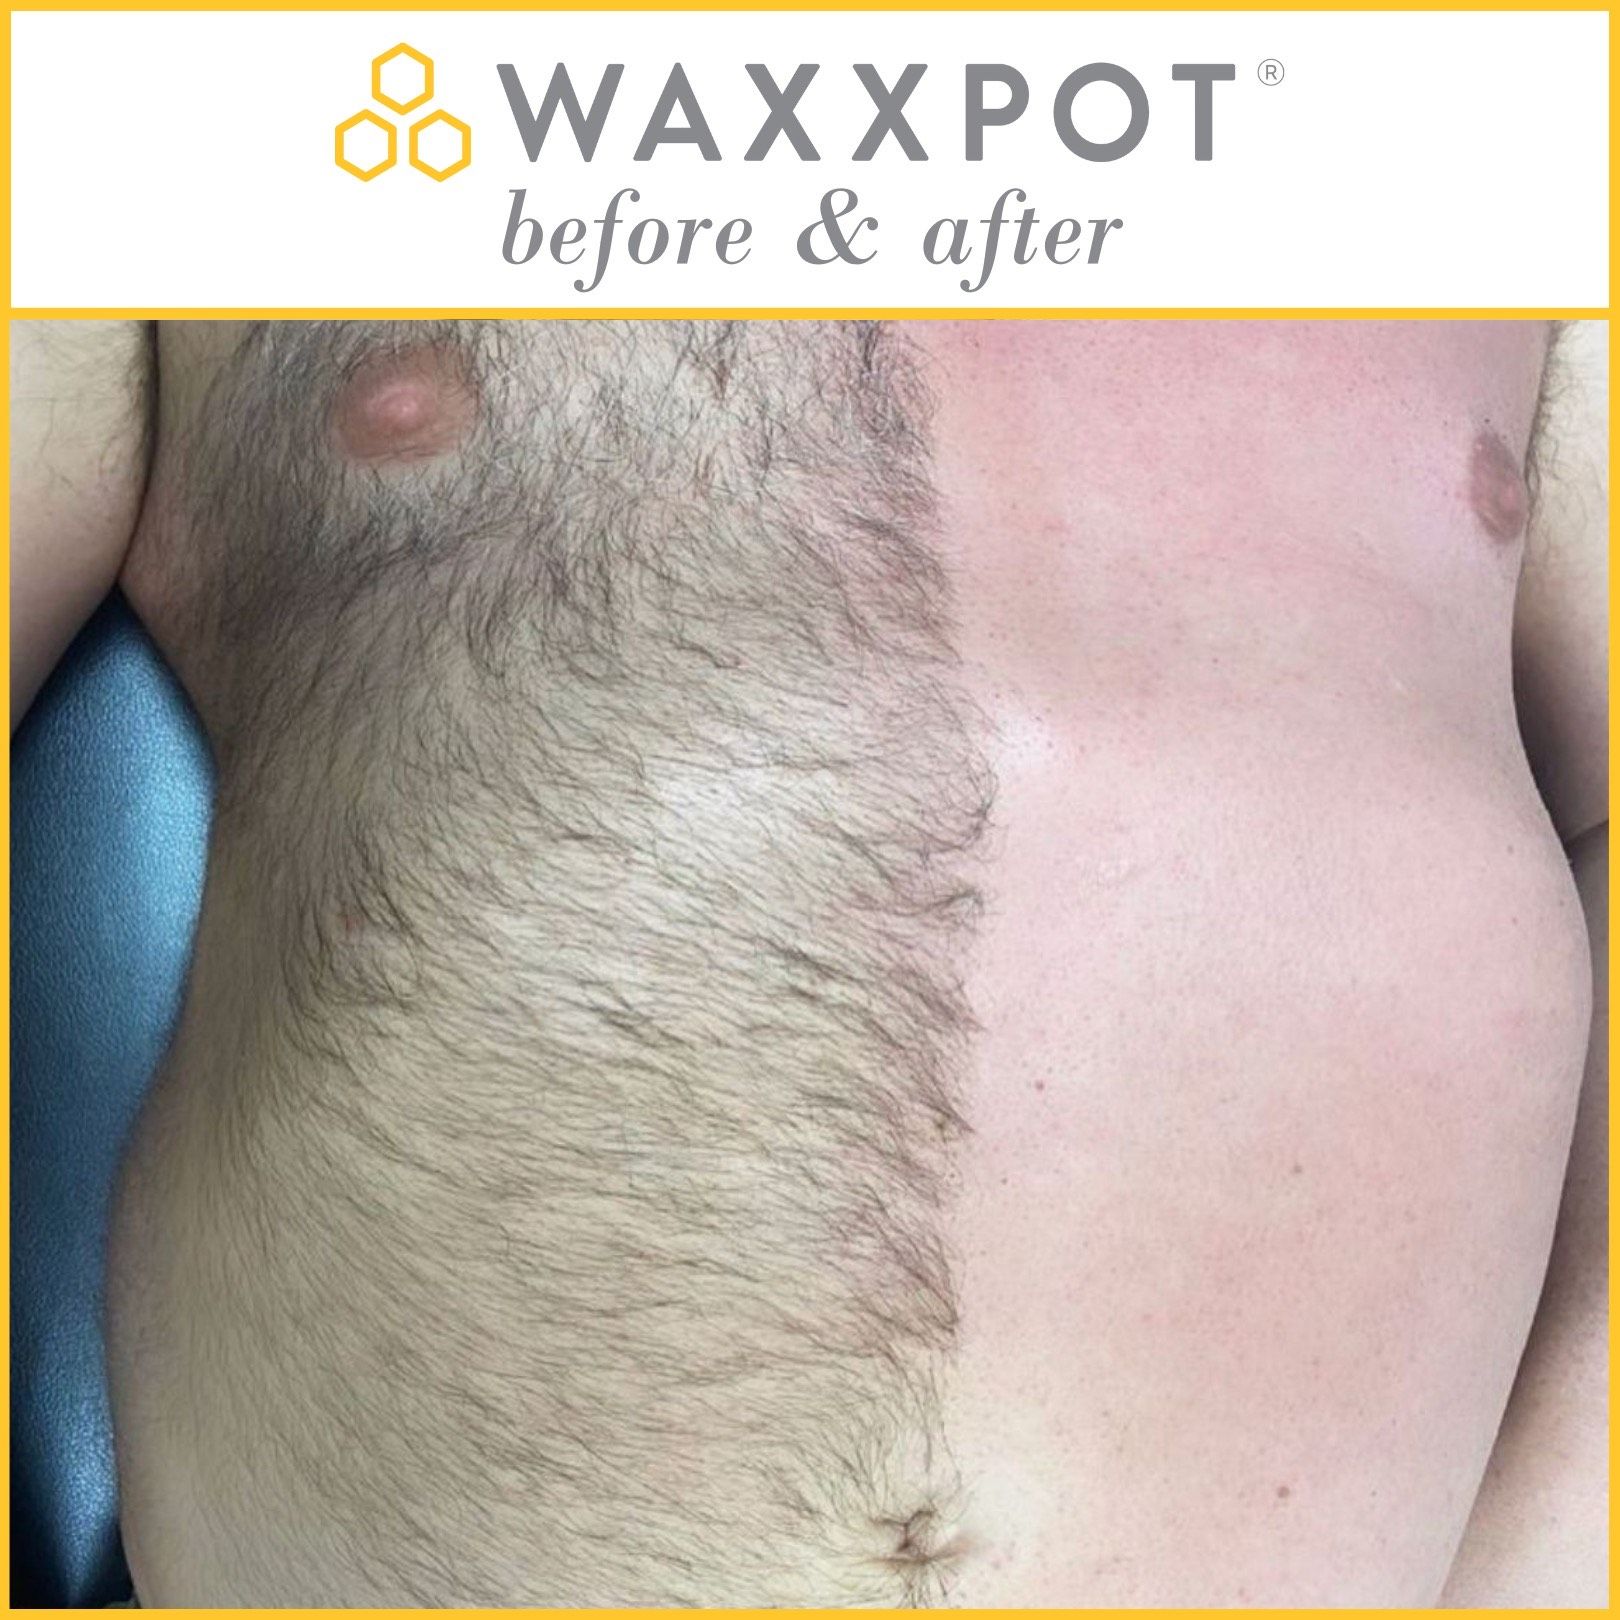 Waxxpot Before & After: Chest Wax